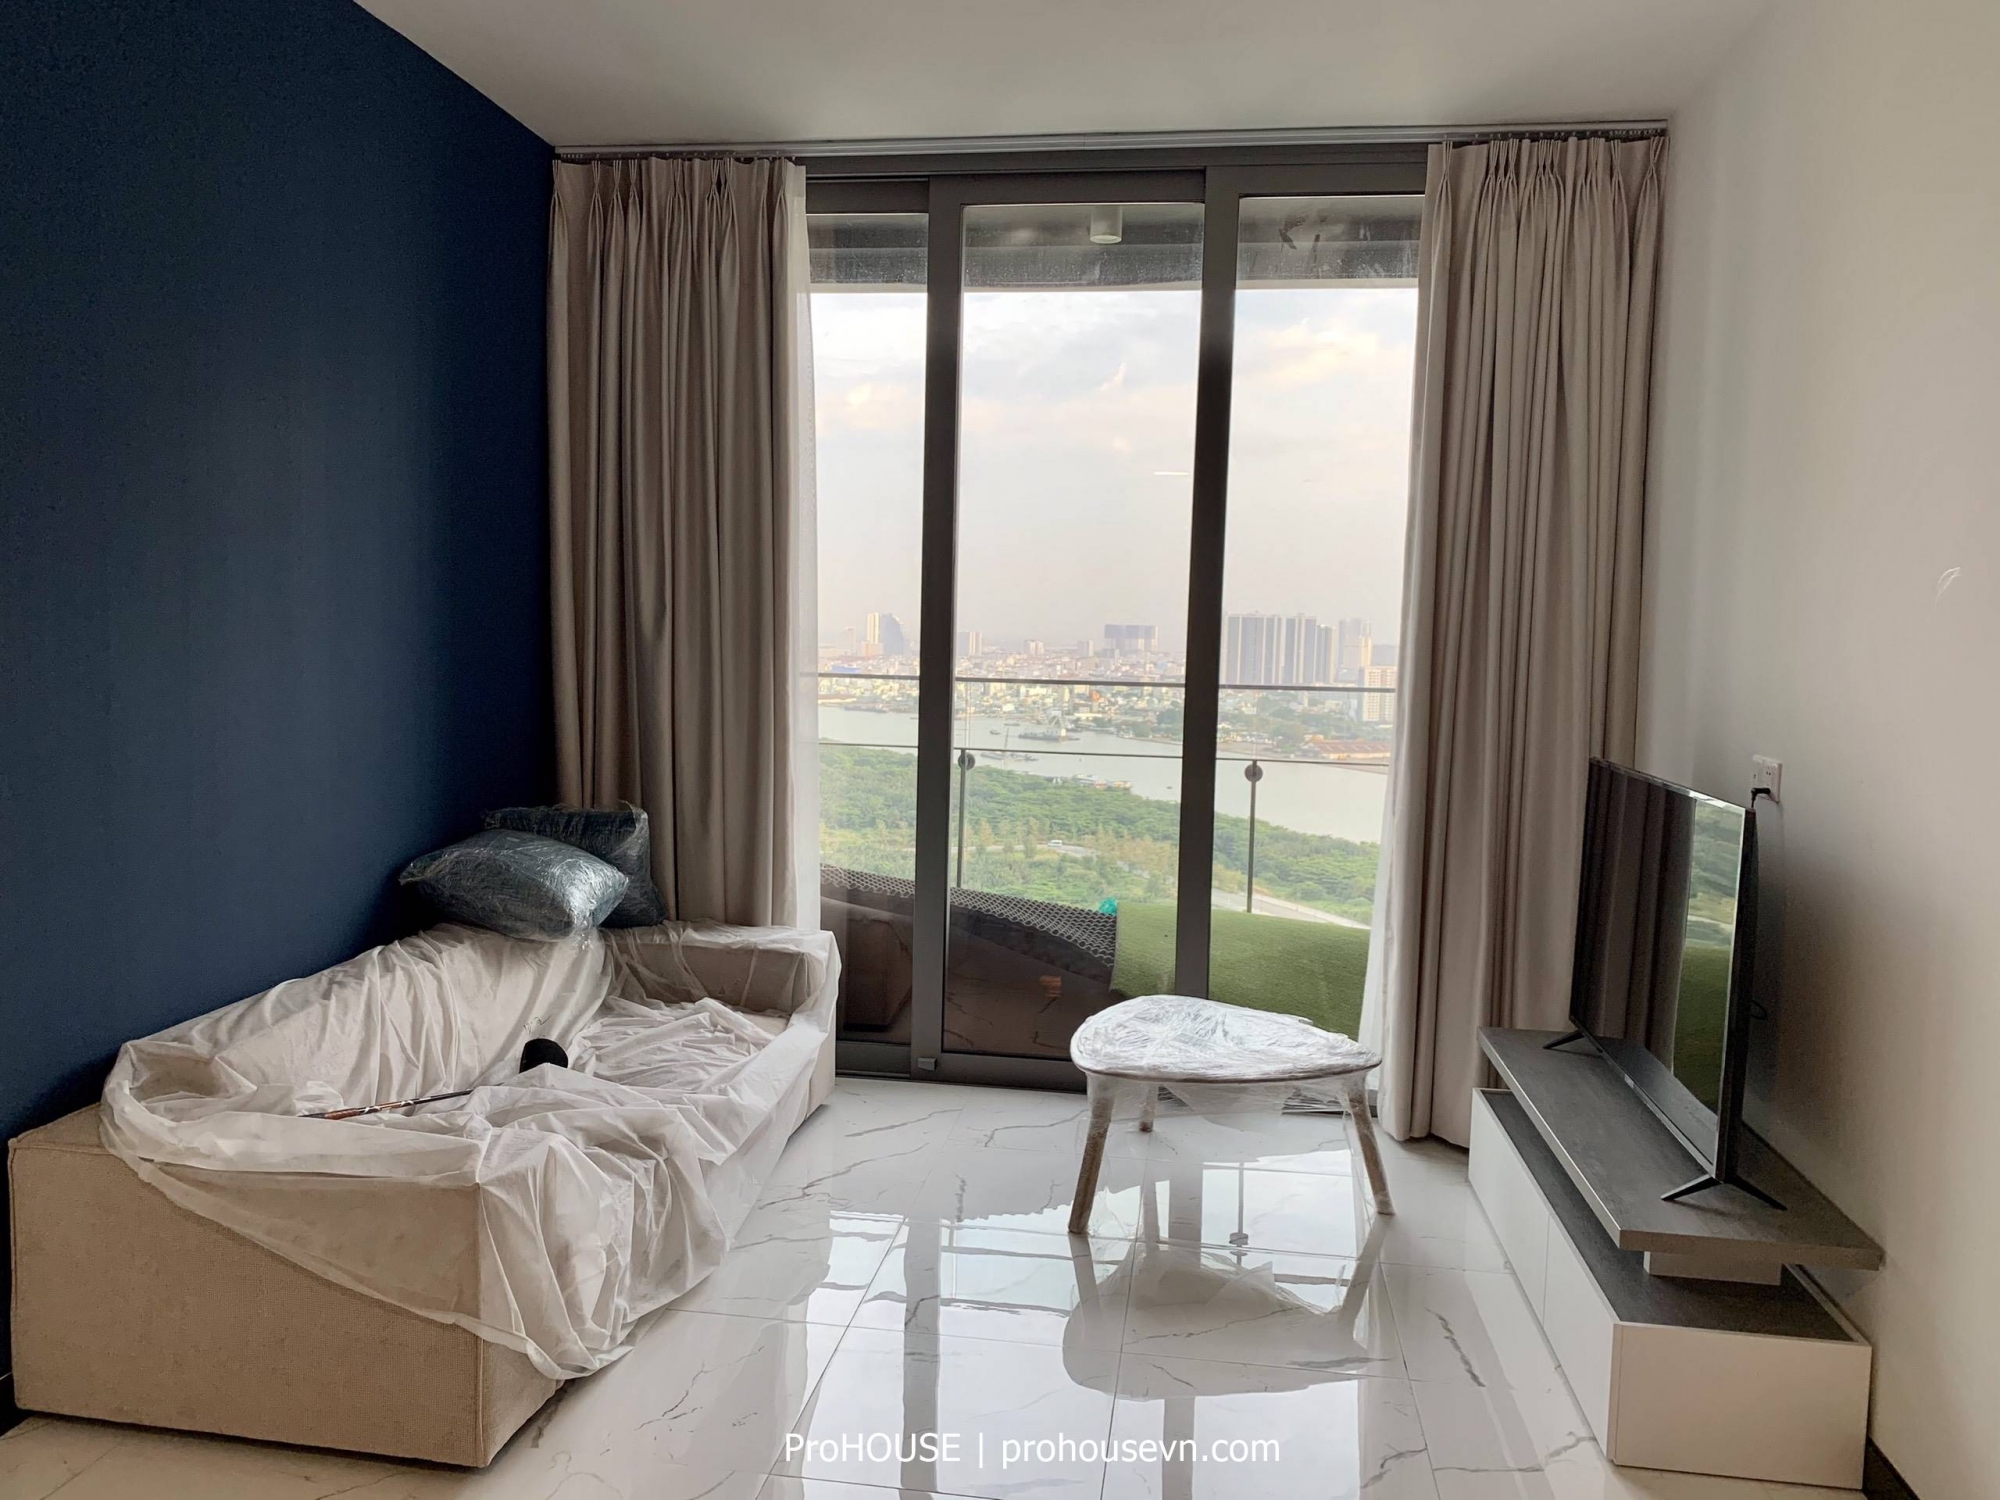 LOW PRICE 1 BEDROOM IN EMPIRE CITY FOR RENT LOCATED IN TILIA RESIDENCES